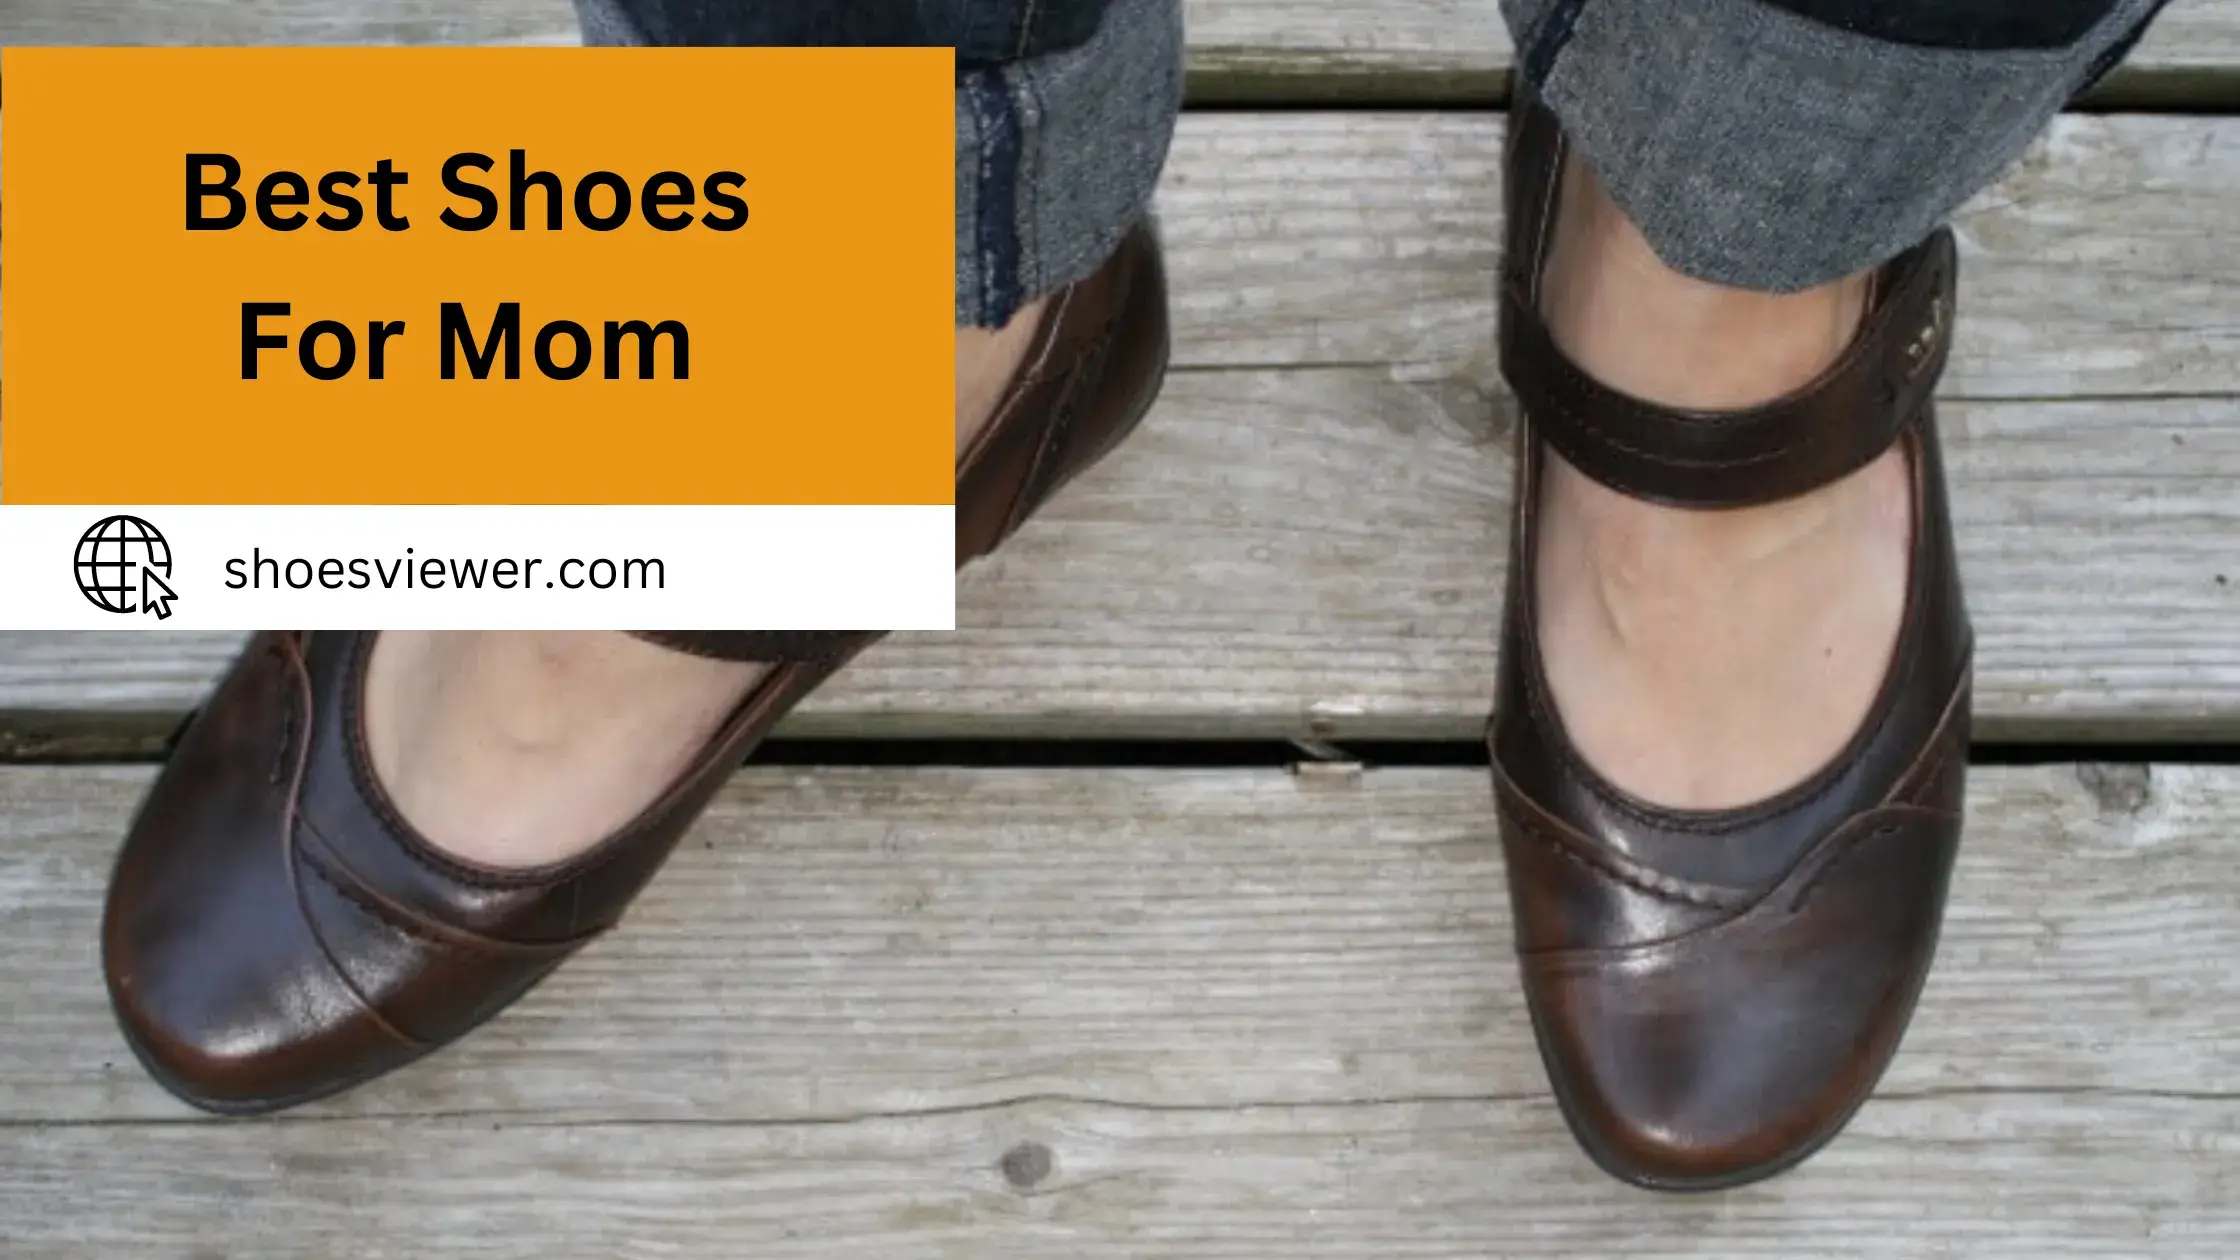 Best Shoes For Mom - (An In-Depth Guide)